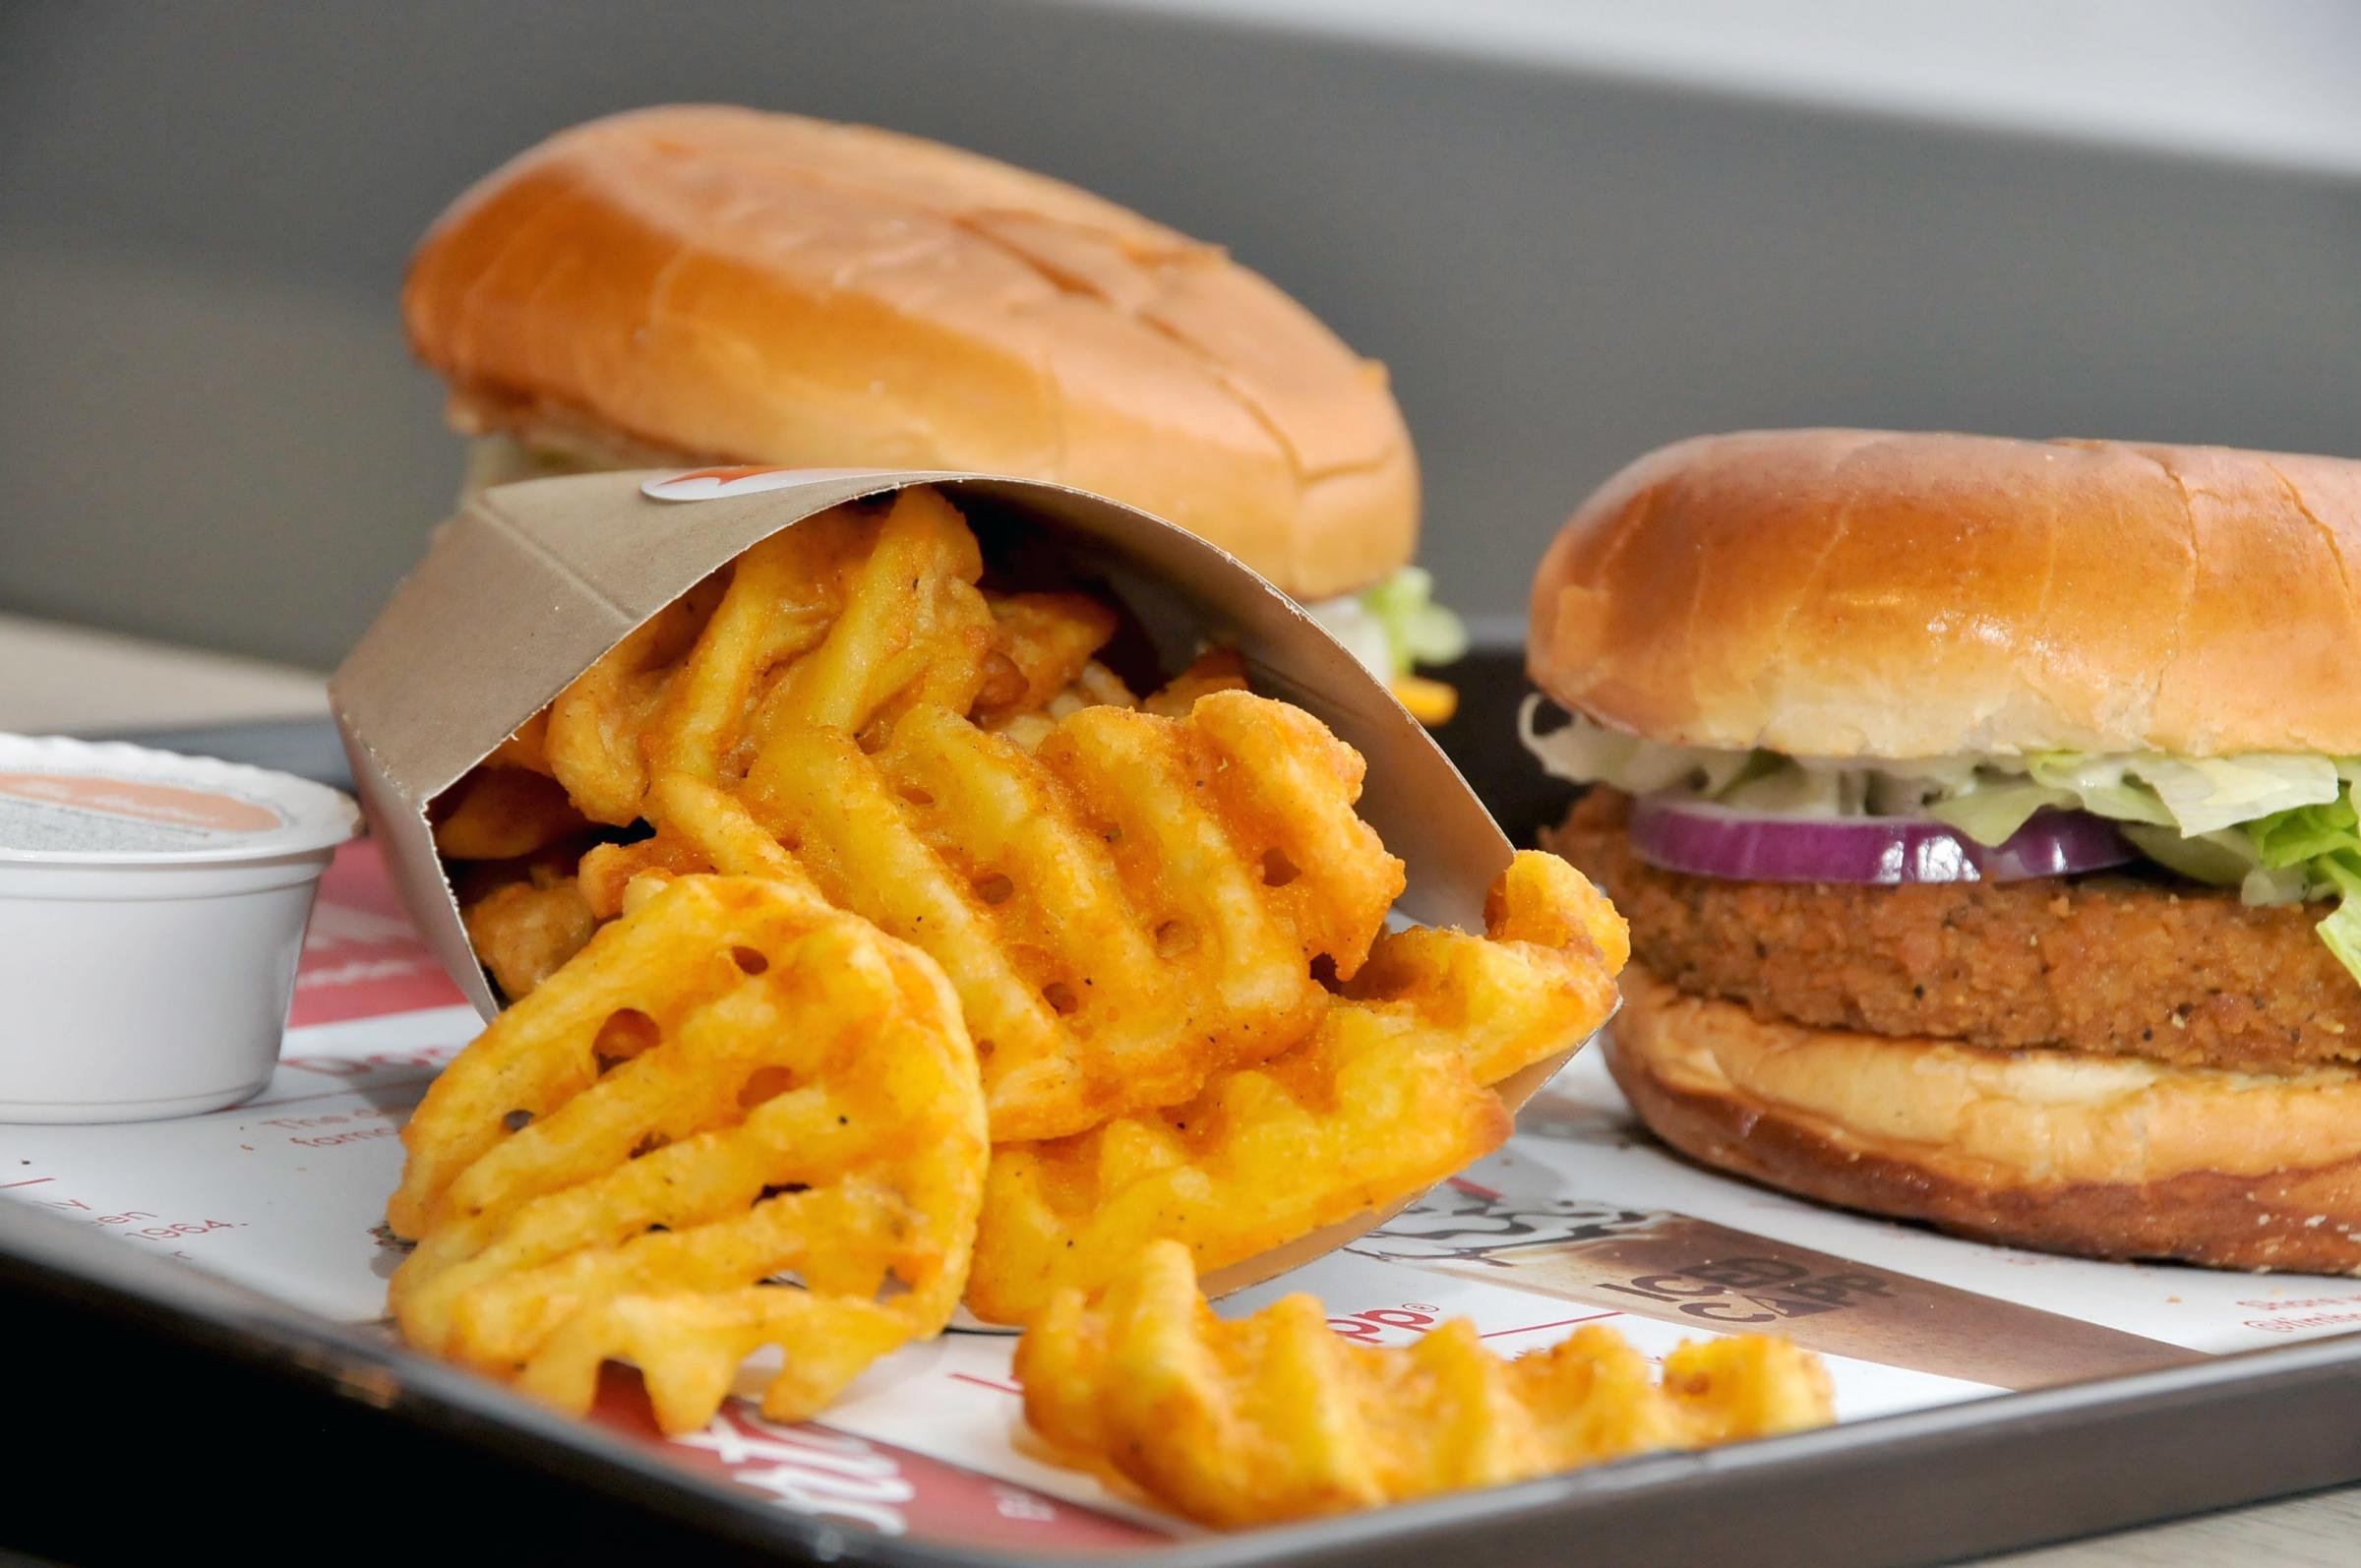 Lattice fries and burgers pictured